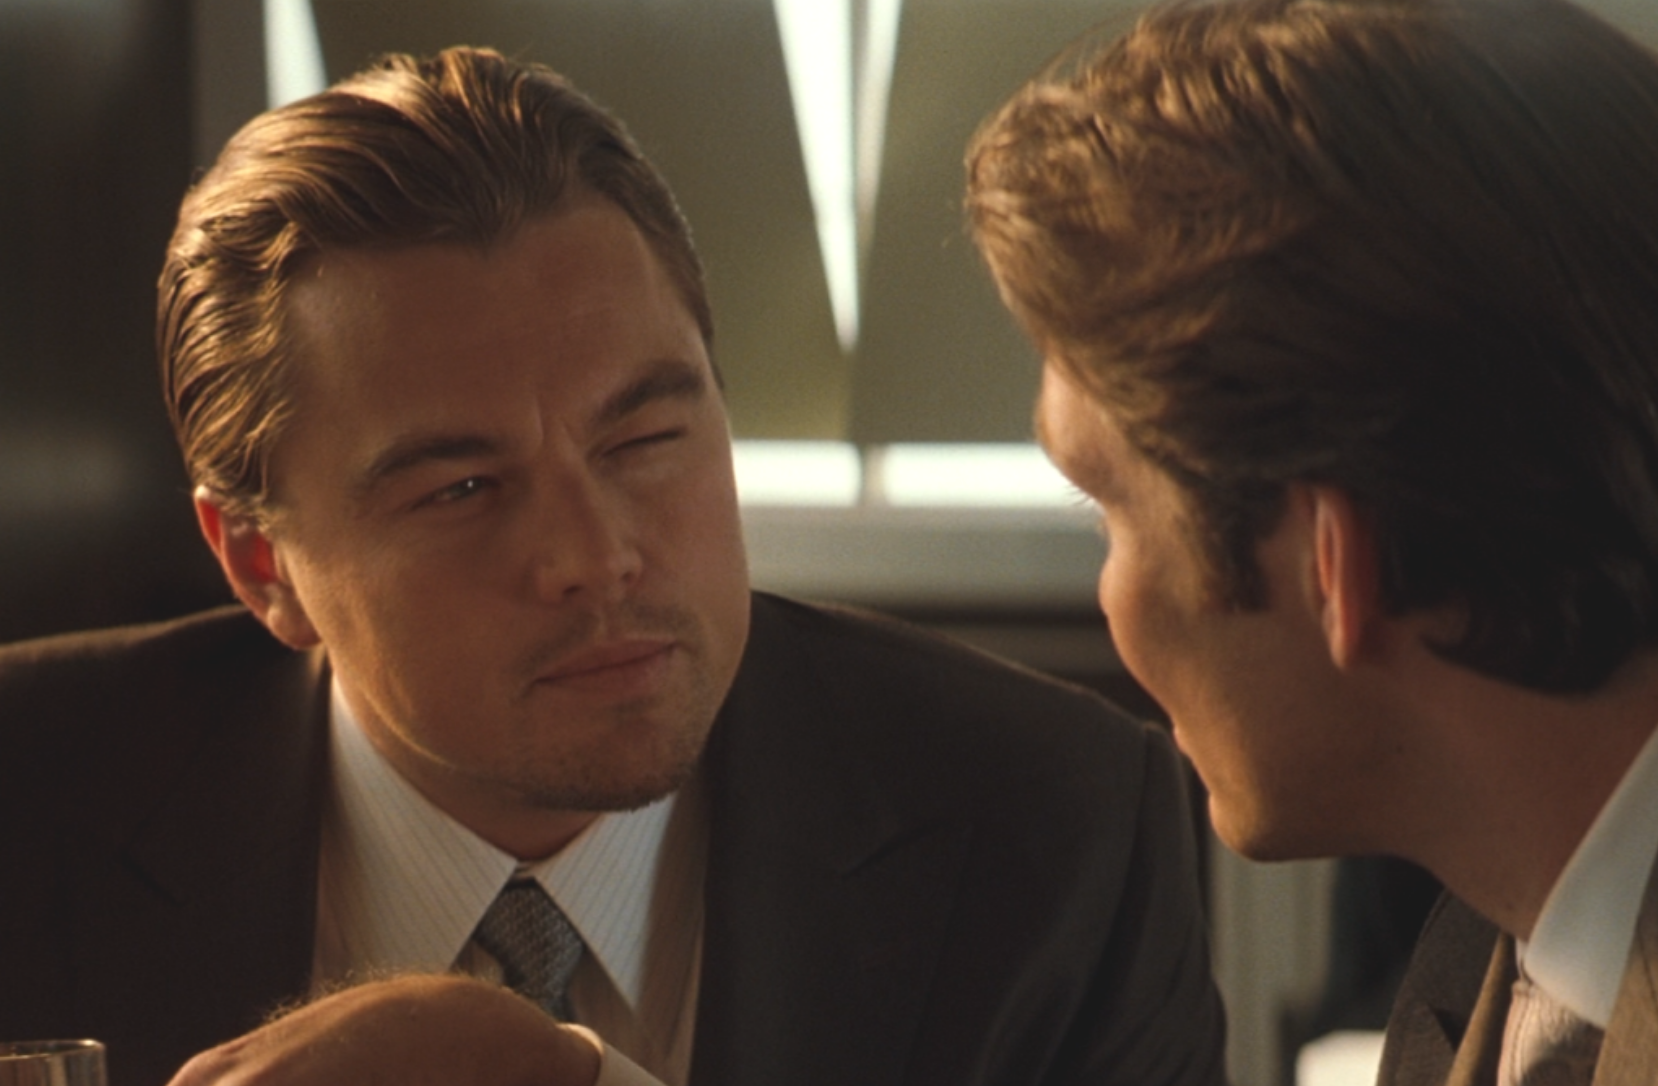 What Does the 'Inception' Ending Mean?